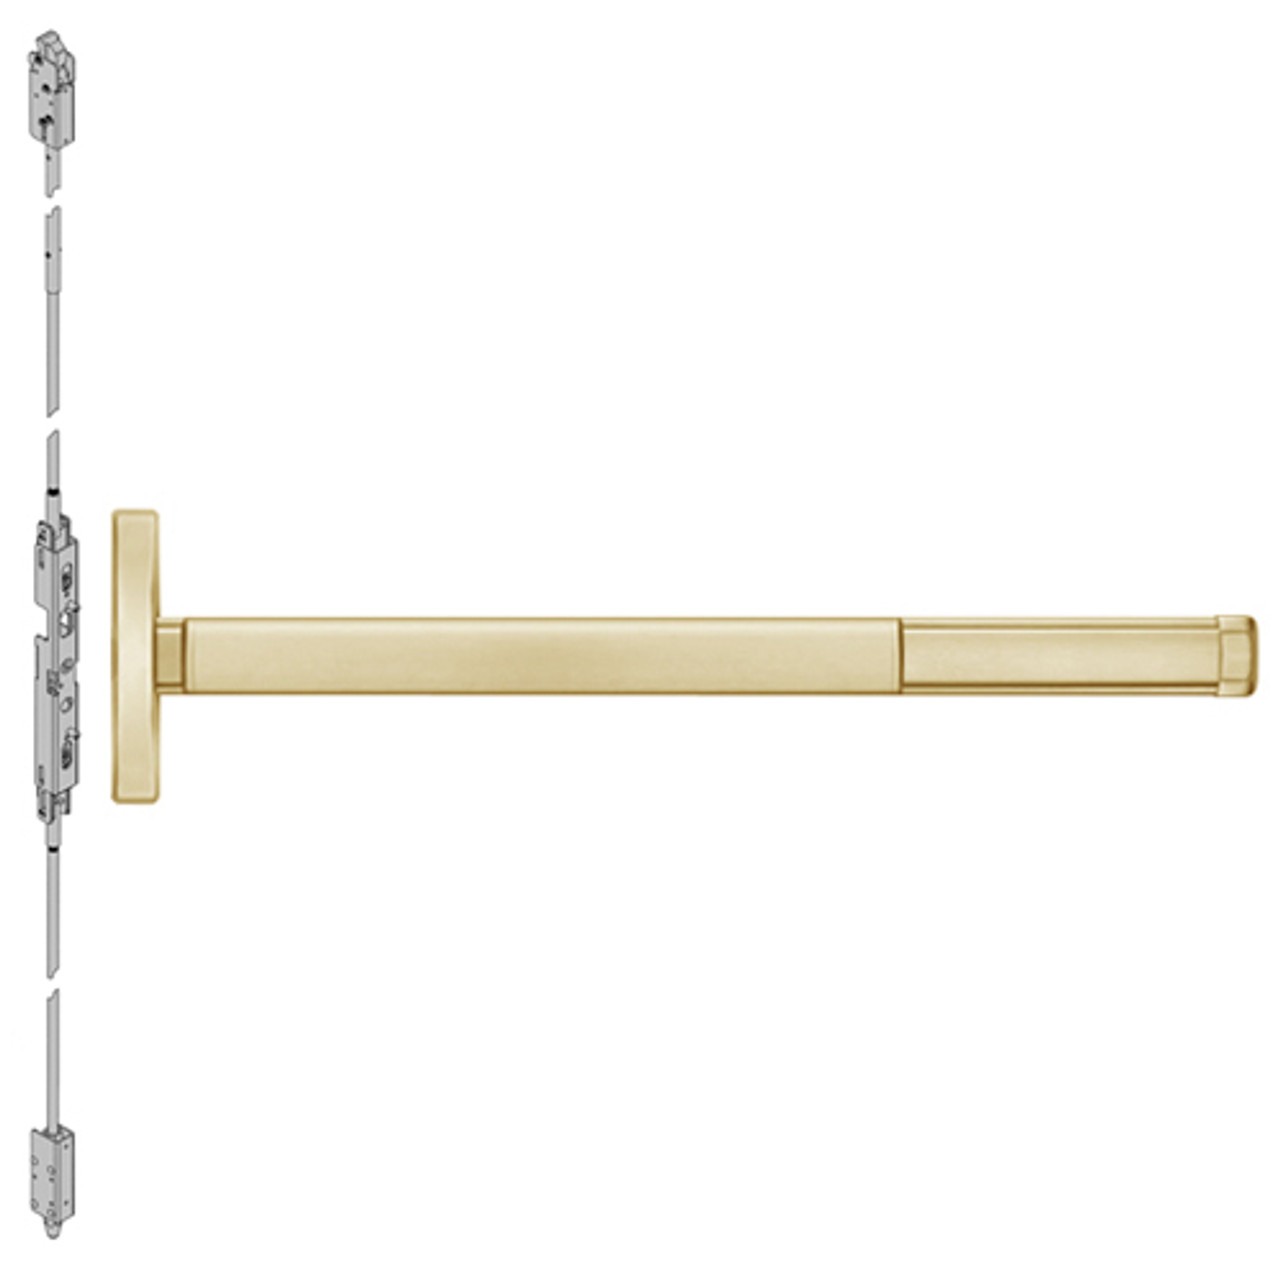 DE2603-606-48 PHI 2600 Series Concealed Vertical Rod Exit Device with Delayed Egress Prepped for Key Retracts Latchbolt in Satin Brass Finish